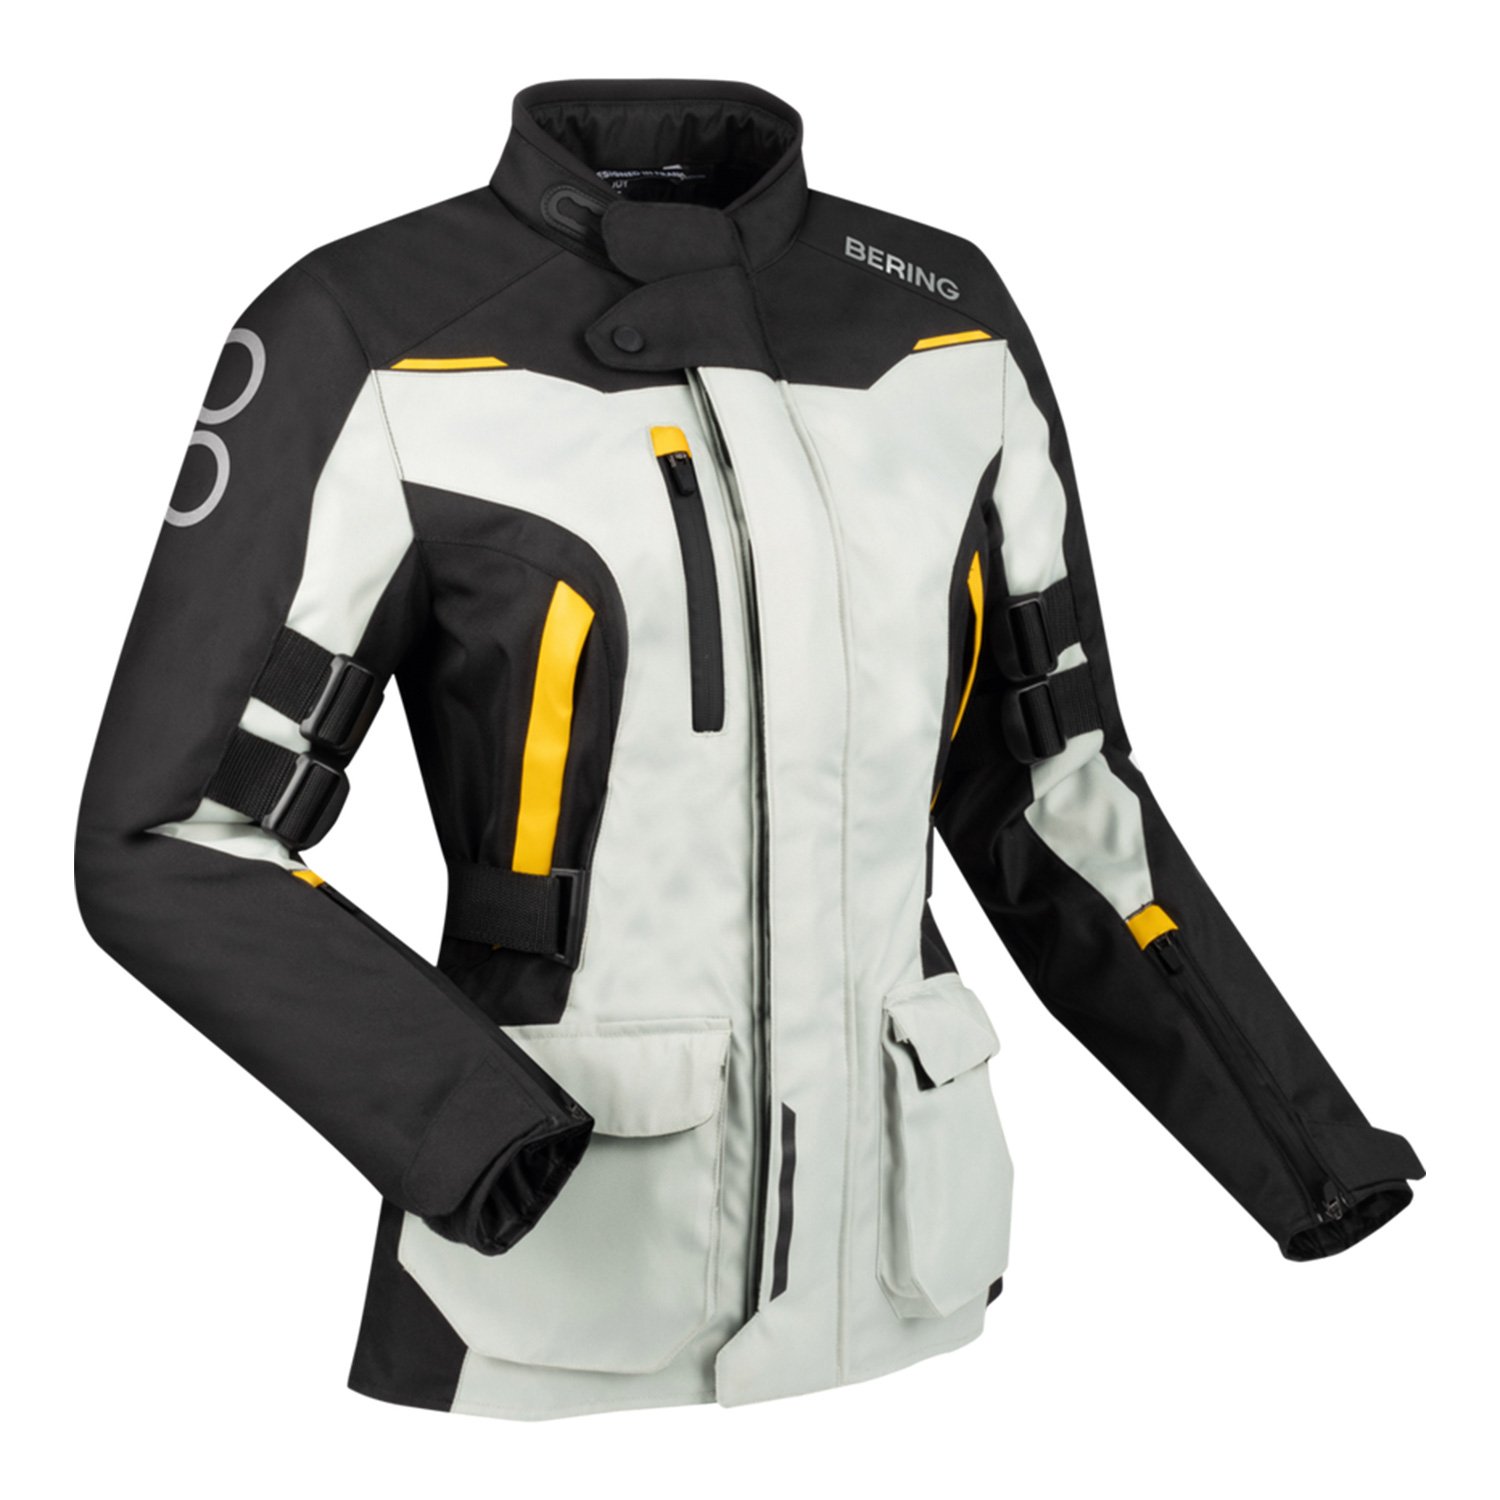 Image of EU Bering Lady Zephyr Jacket Black Grey Yellow Taille T4